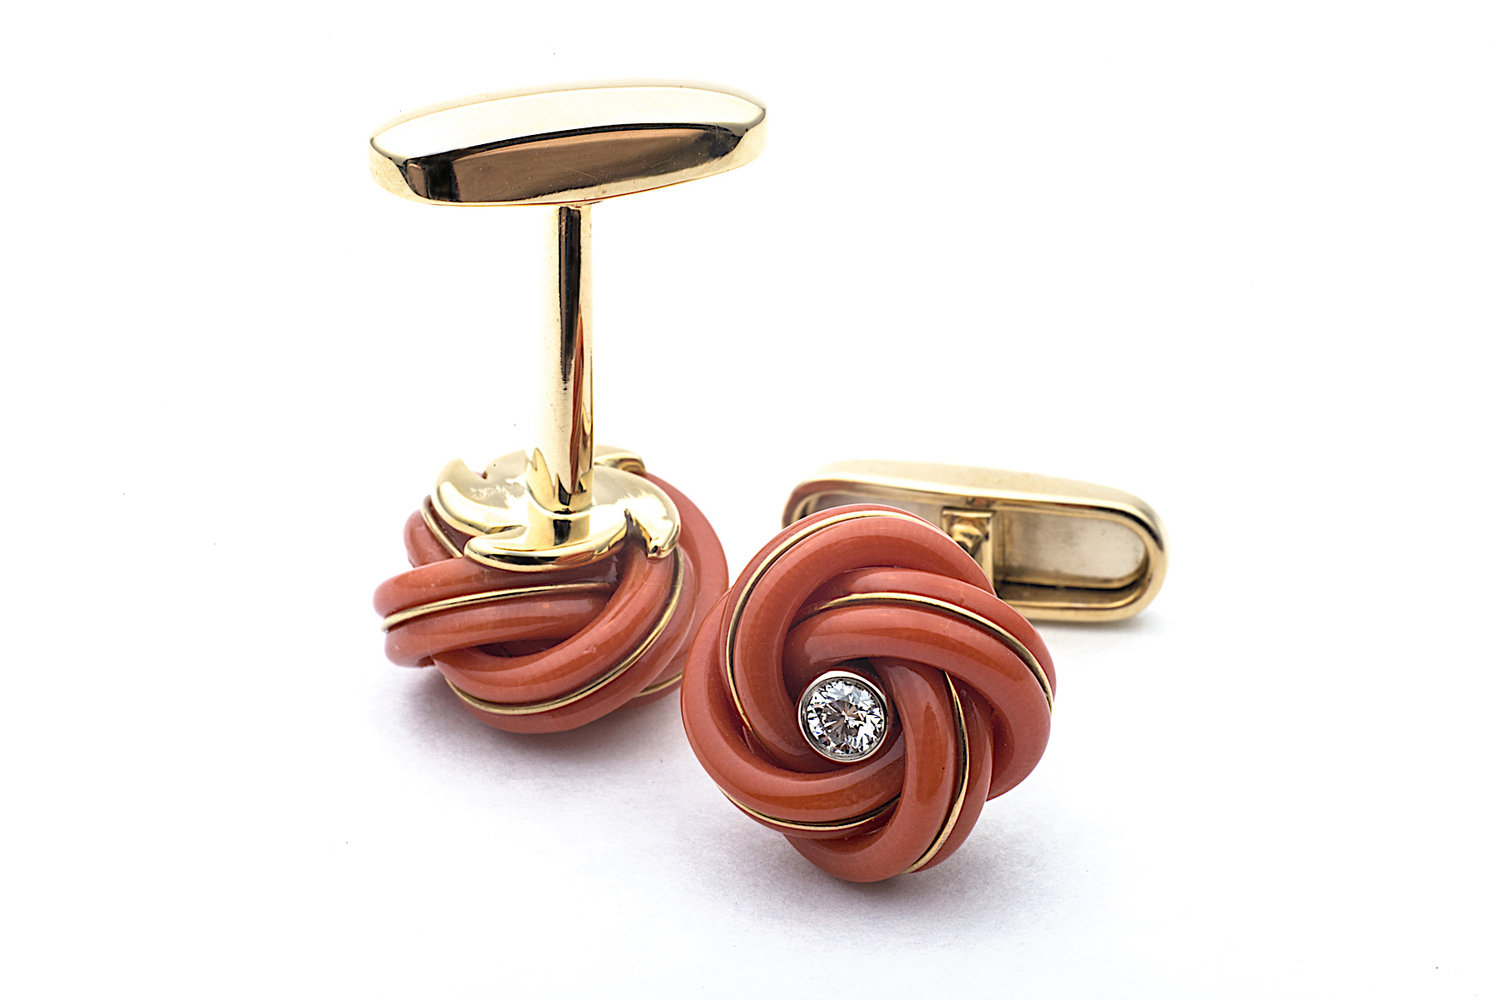 Men's Gold/Peach Button Cover Cuff-Link With Crystal Stud Centered